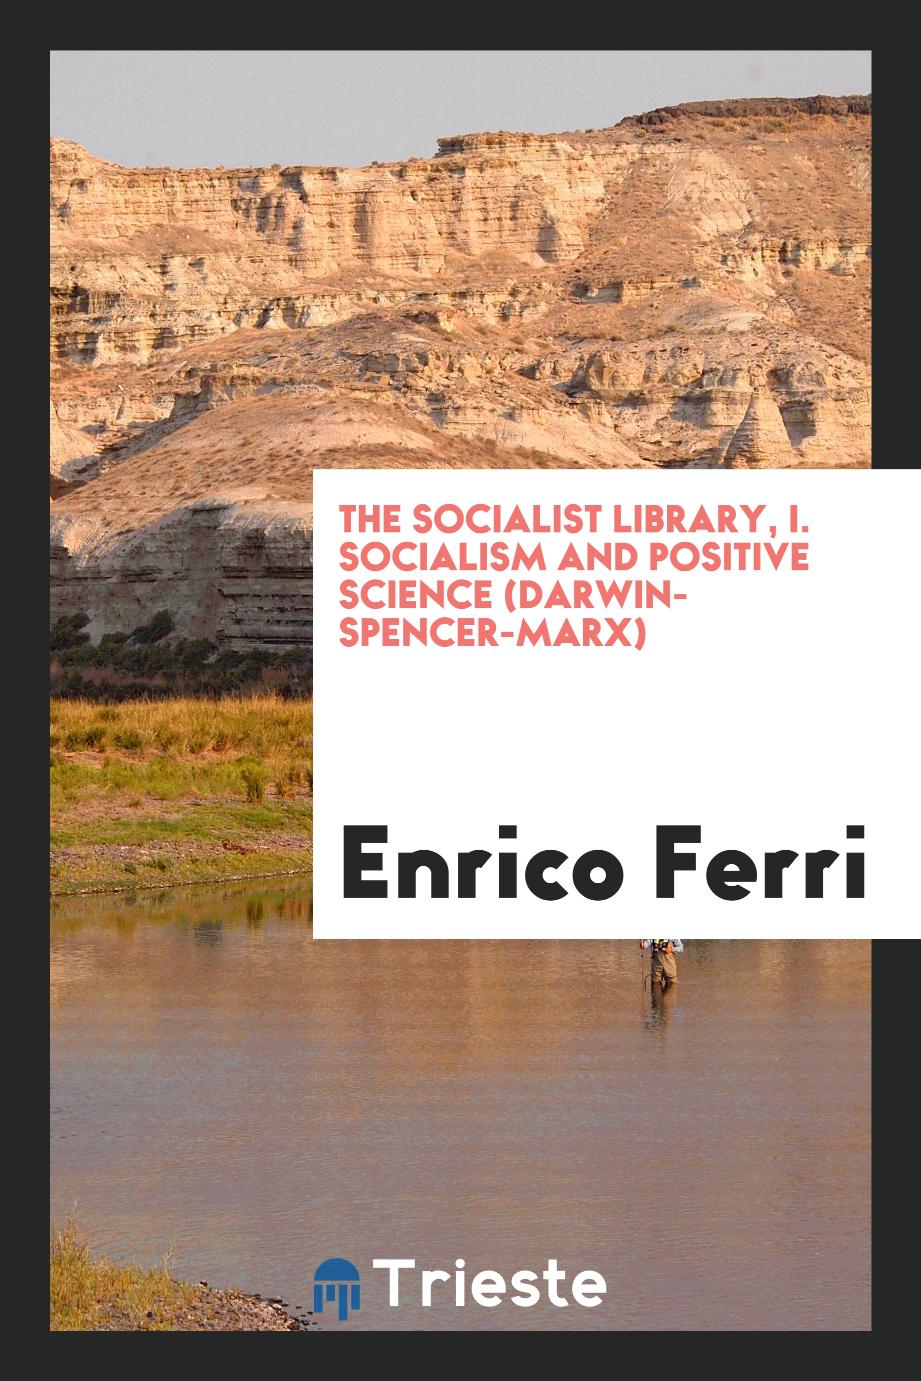 The Socialist Library, I. Socialism and positive science (Darwin-Spencer-Marx)